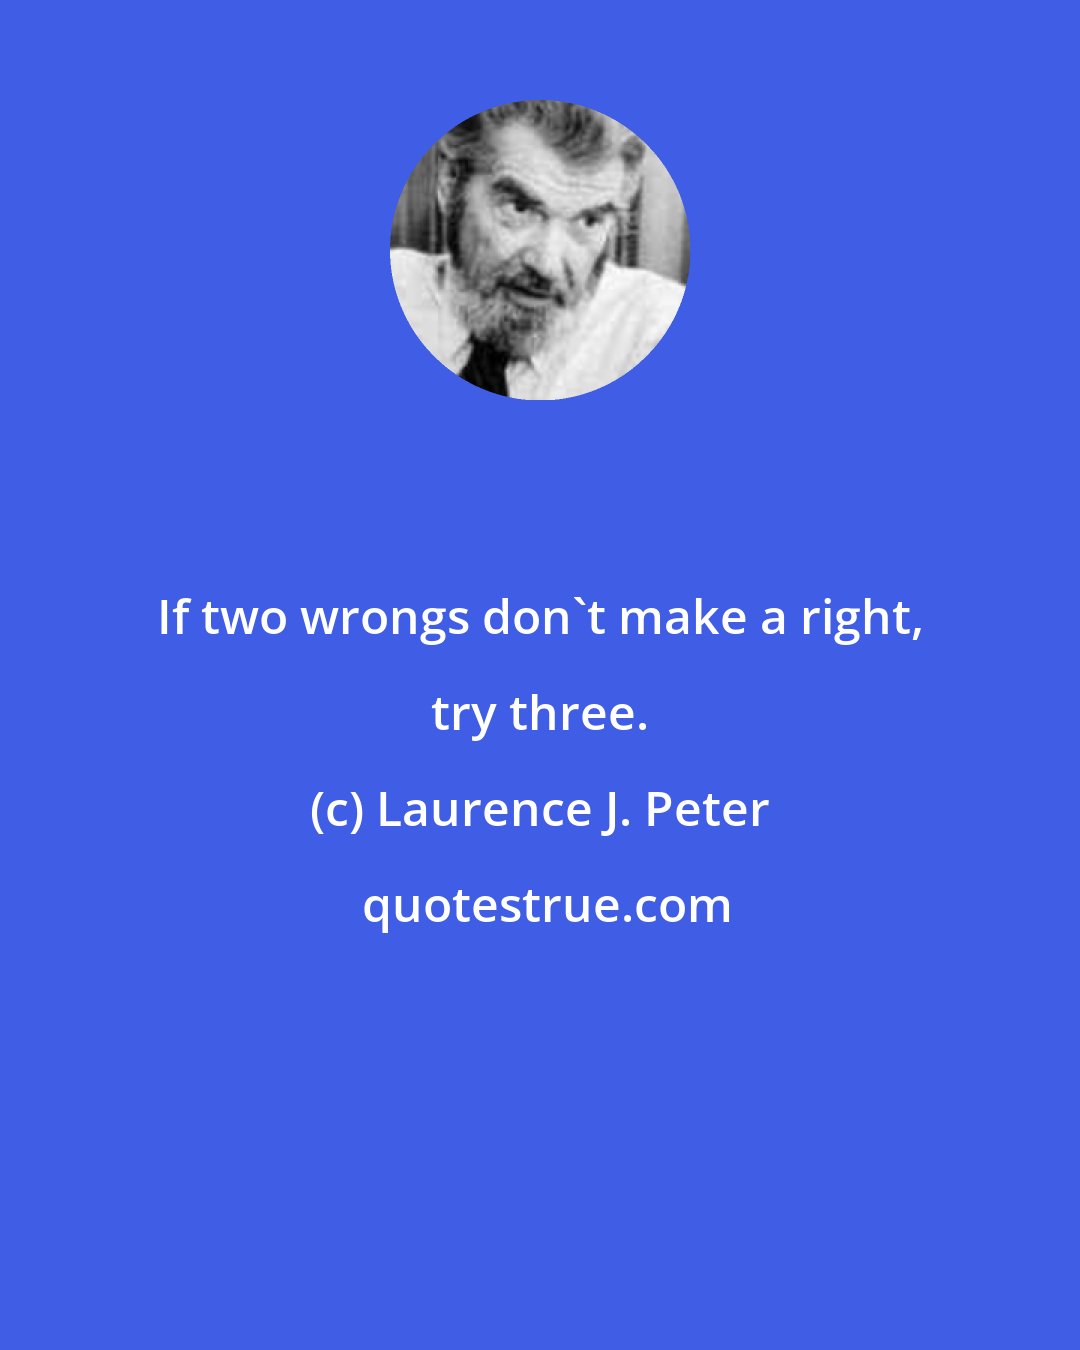 Laurence J. Peter: If two wrongs don't make a right, try three.